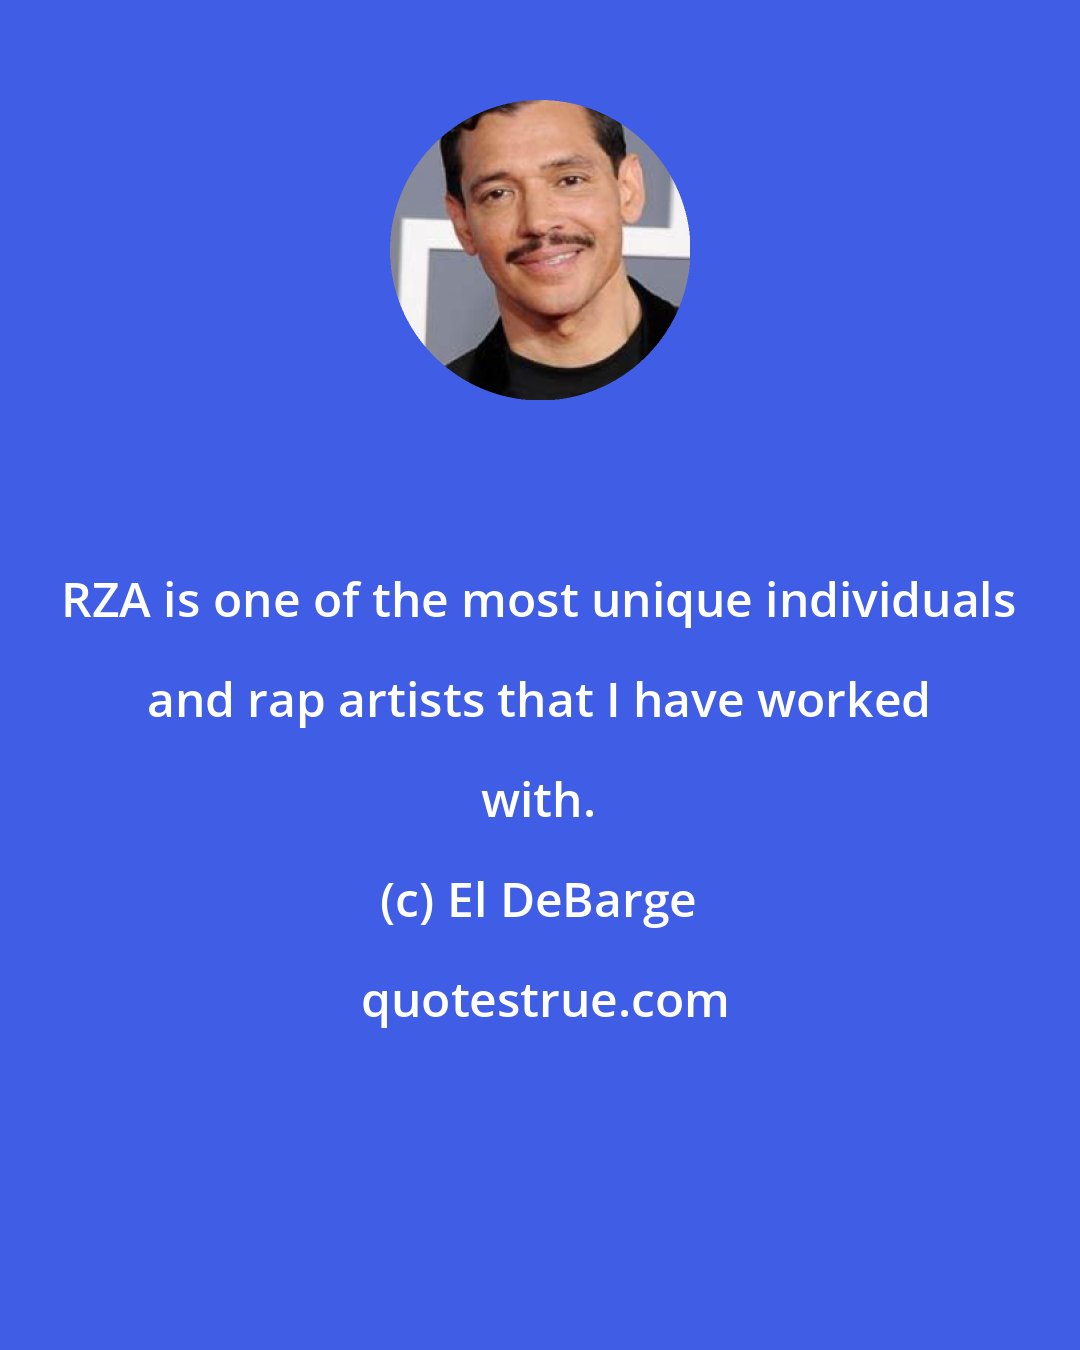 El DeBarge: RZA is one of the most unique individuals and rap artists that I have worked with.